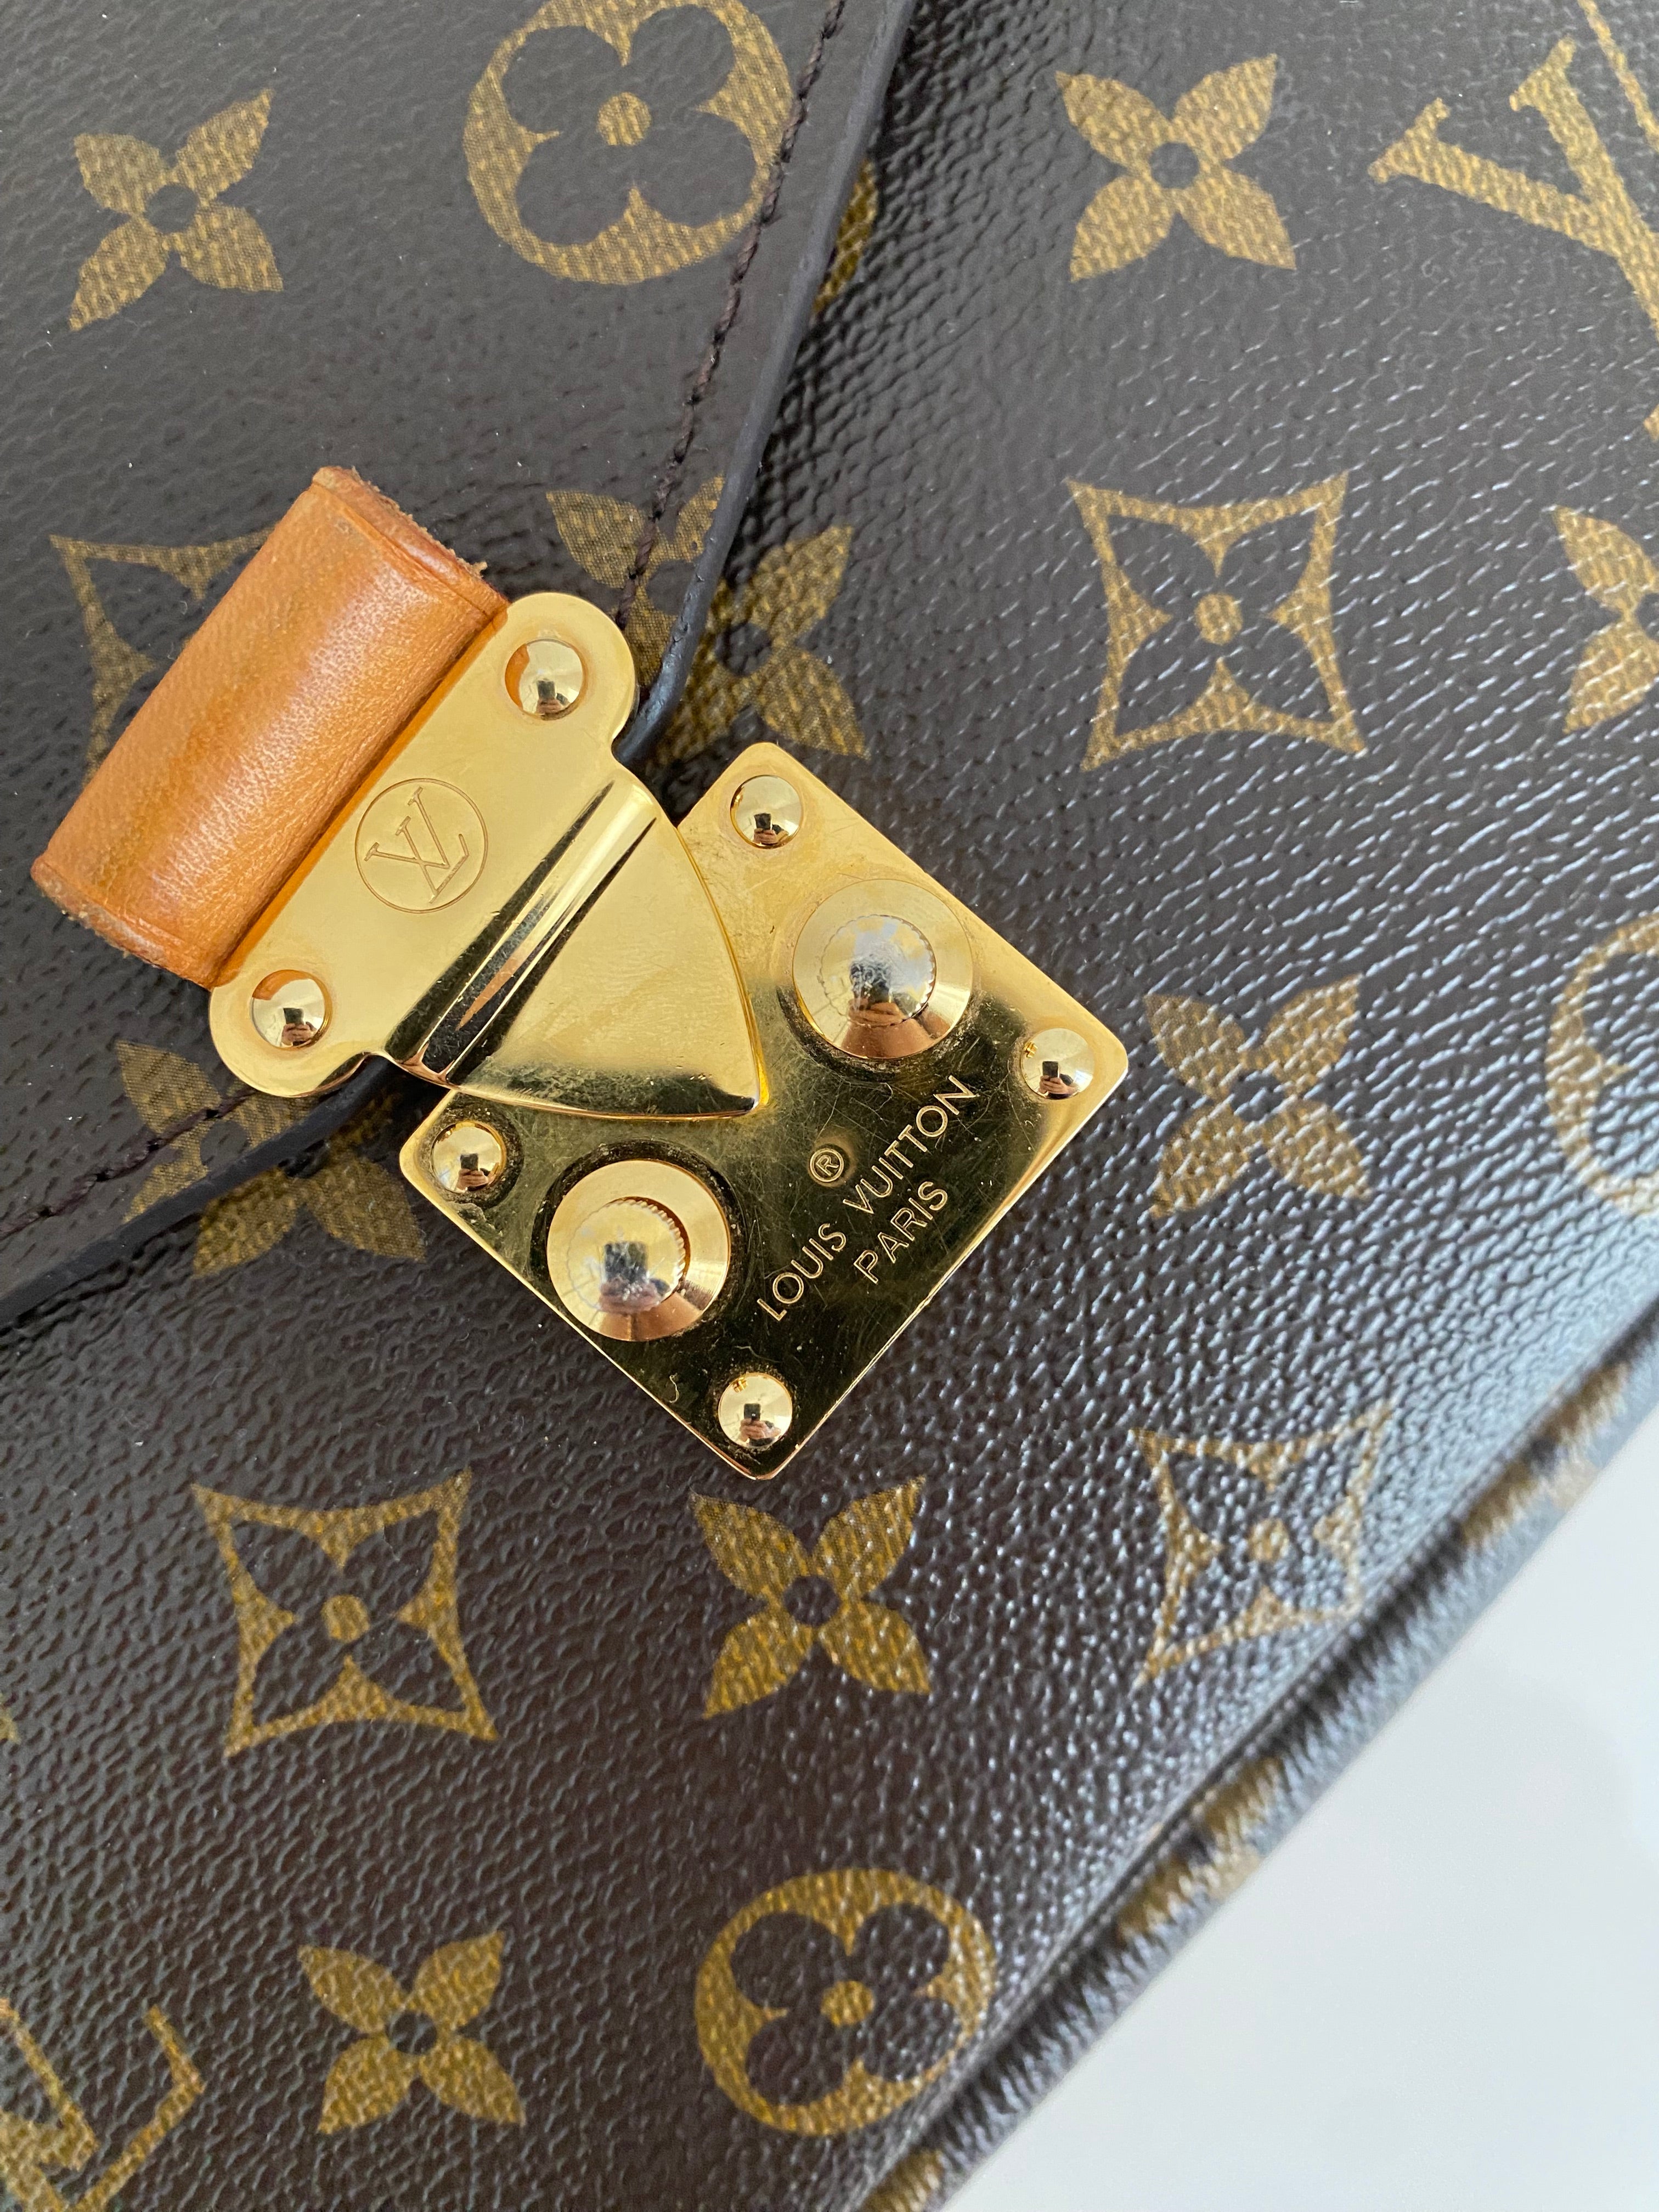 What's in my Bag - Pochette Metis